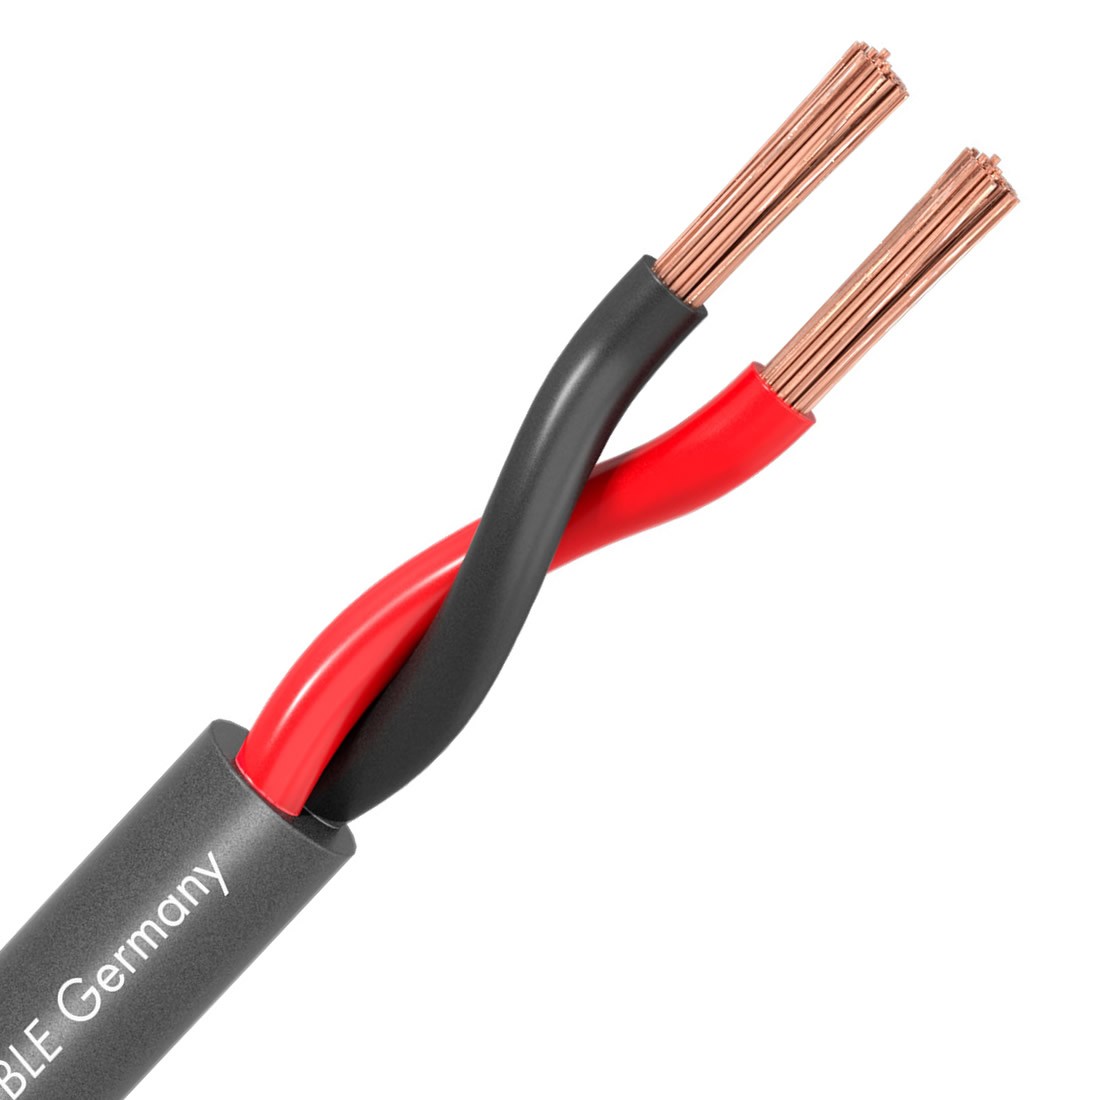 SOMMERCABLE MERIDIAN SP240 HP Cable Copper OFC 2x4.0mm Ø 9.5mm